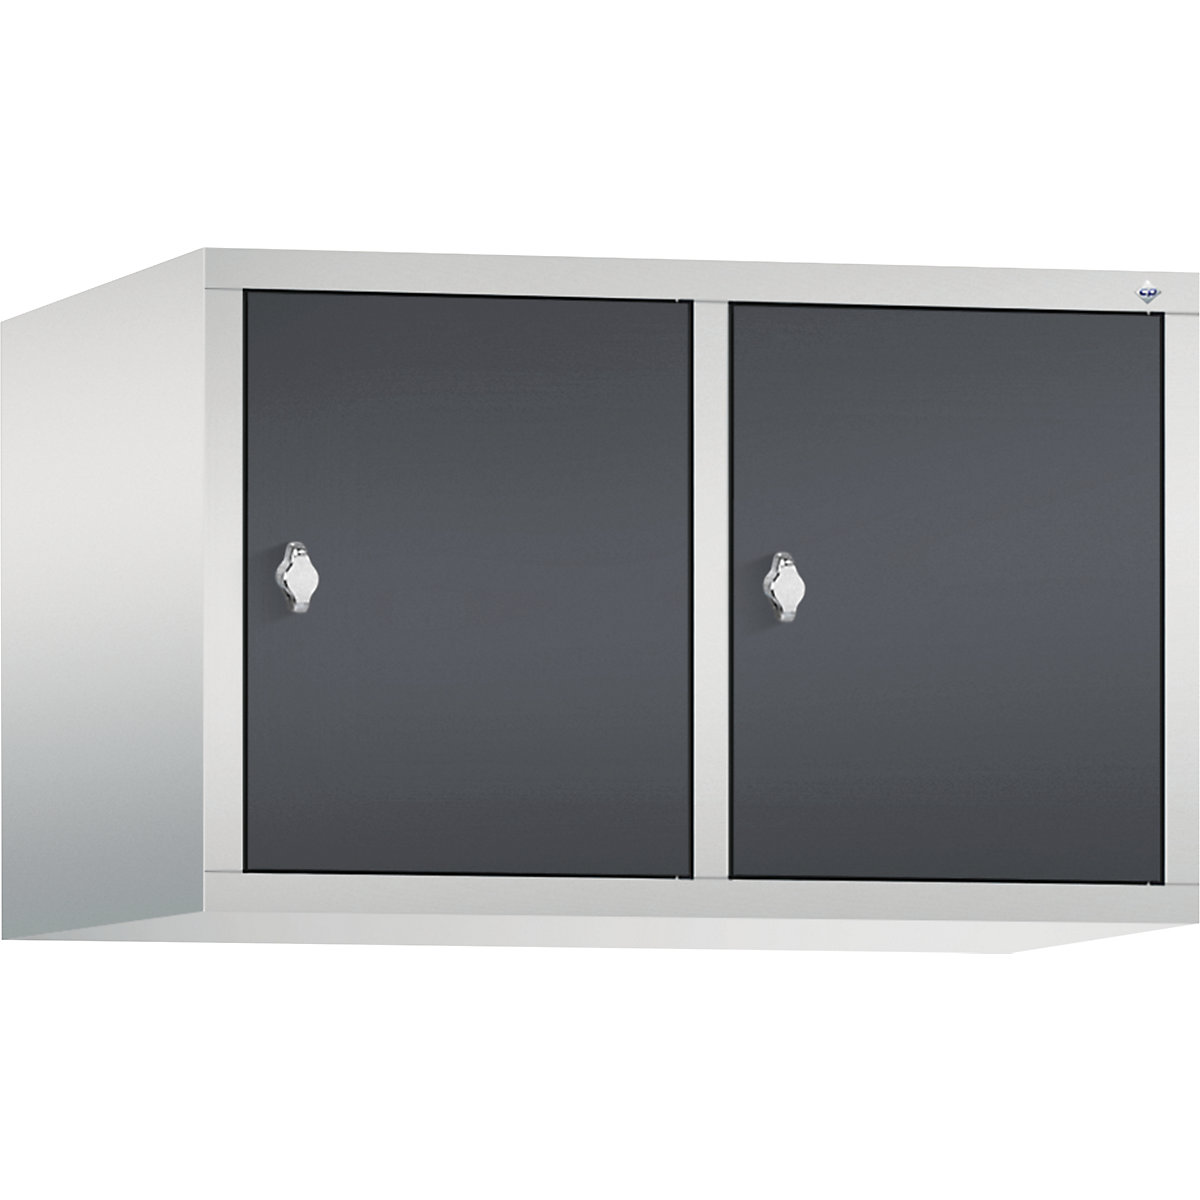 CLASSIC add-on cupboard – C+P, 2 compartments, compartment width 400 mm, light grey / black grey-9